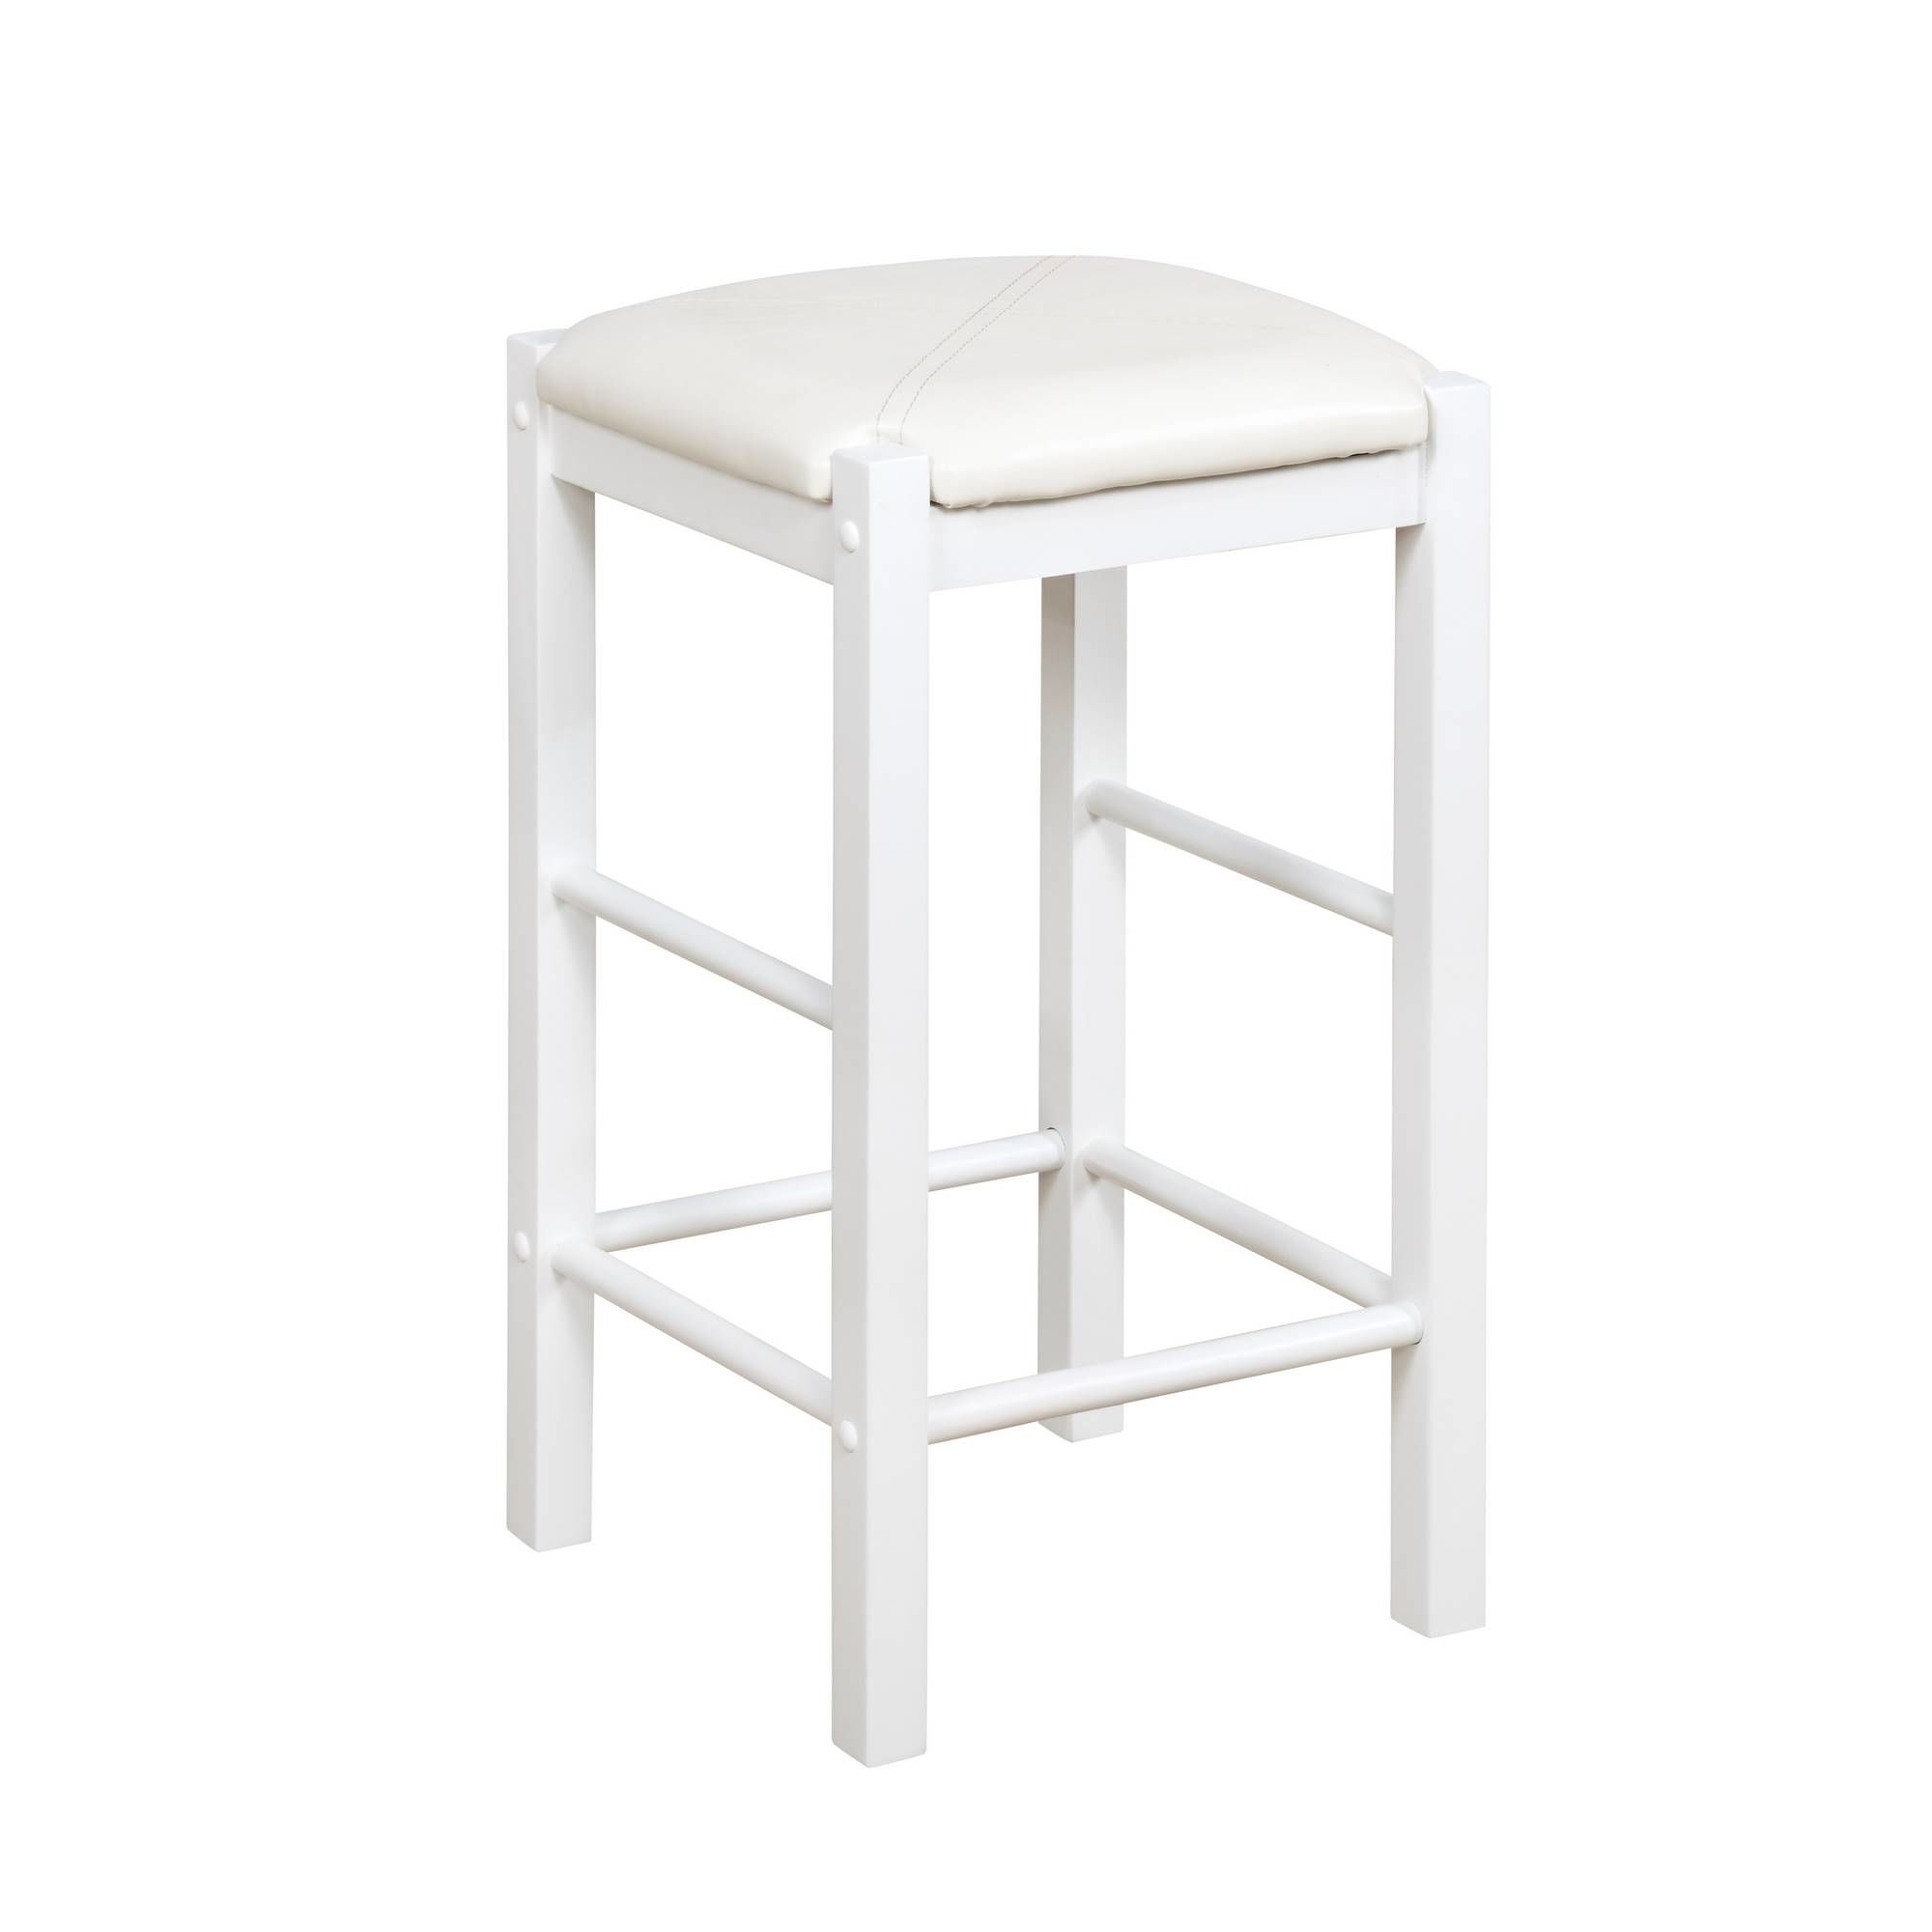 Furniture > Furniture Sets > Dining Sets in White by Linon